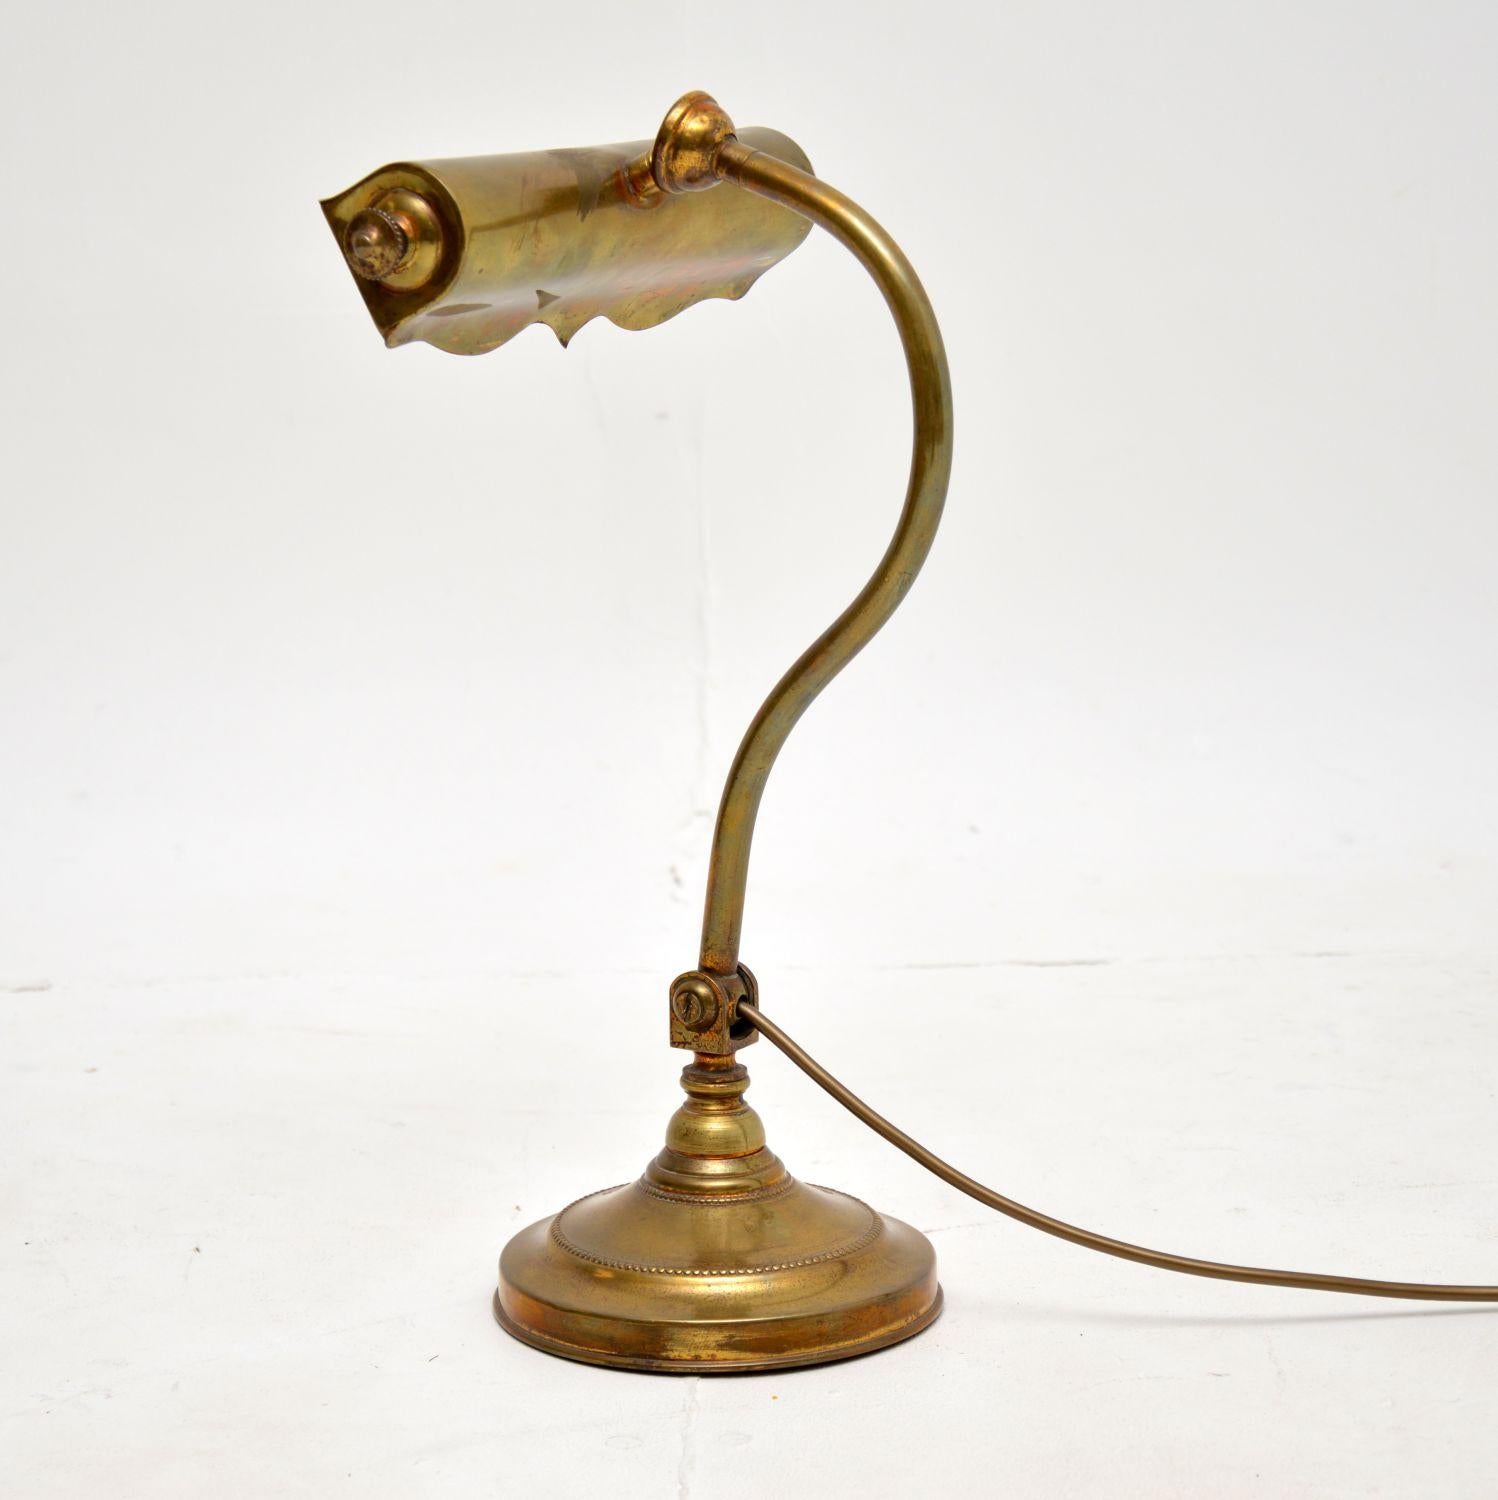 A fantastic adjustable solid brass Edwardian desk lamp. This was made in England, it dates from around the 1900-1910 period.

It has a beautiful design, with a beautiful and curvaceous shape. The main support can be adjusted and the lamp shade can